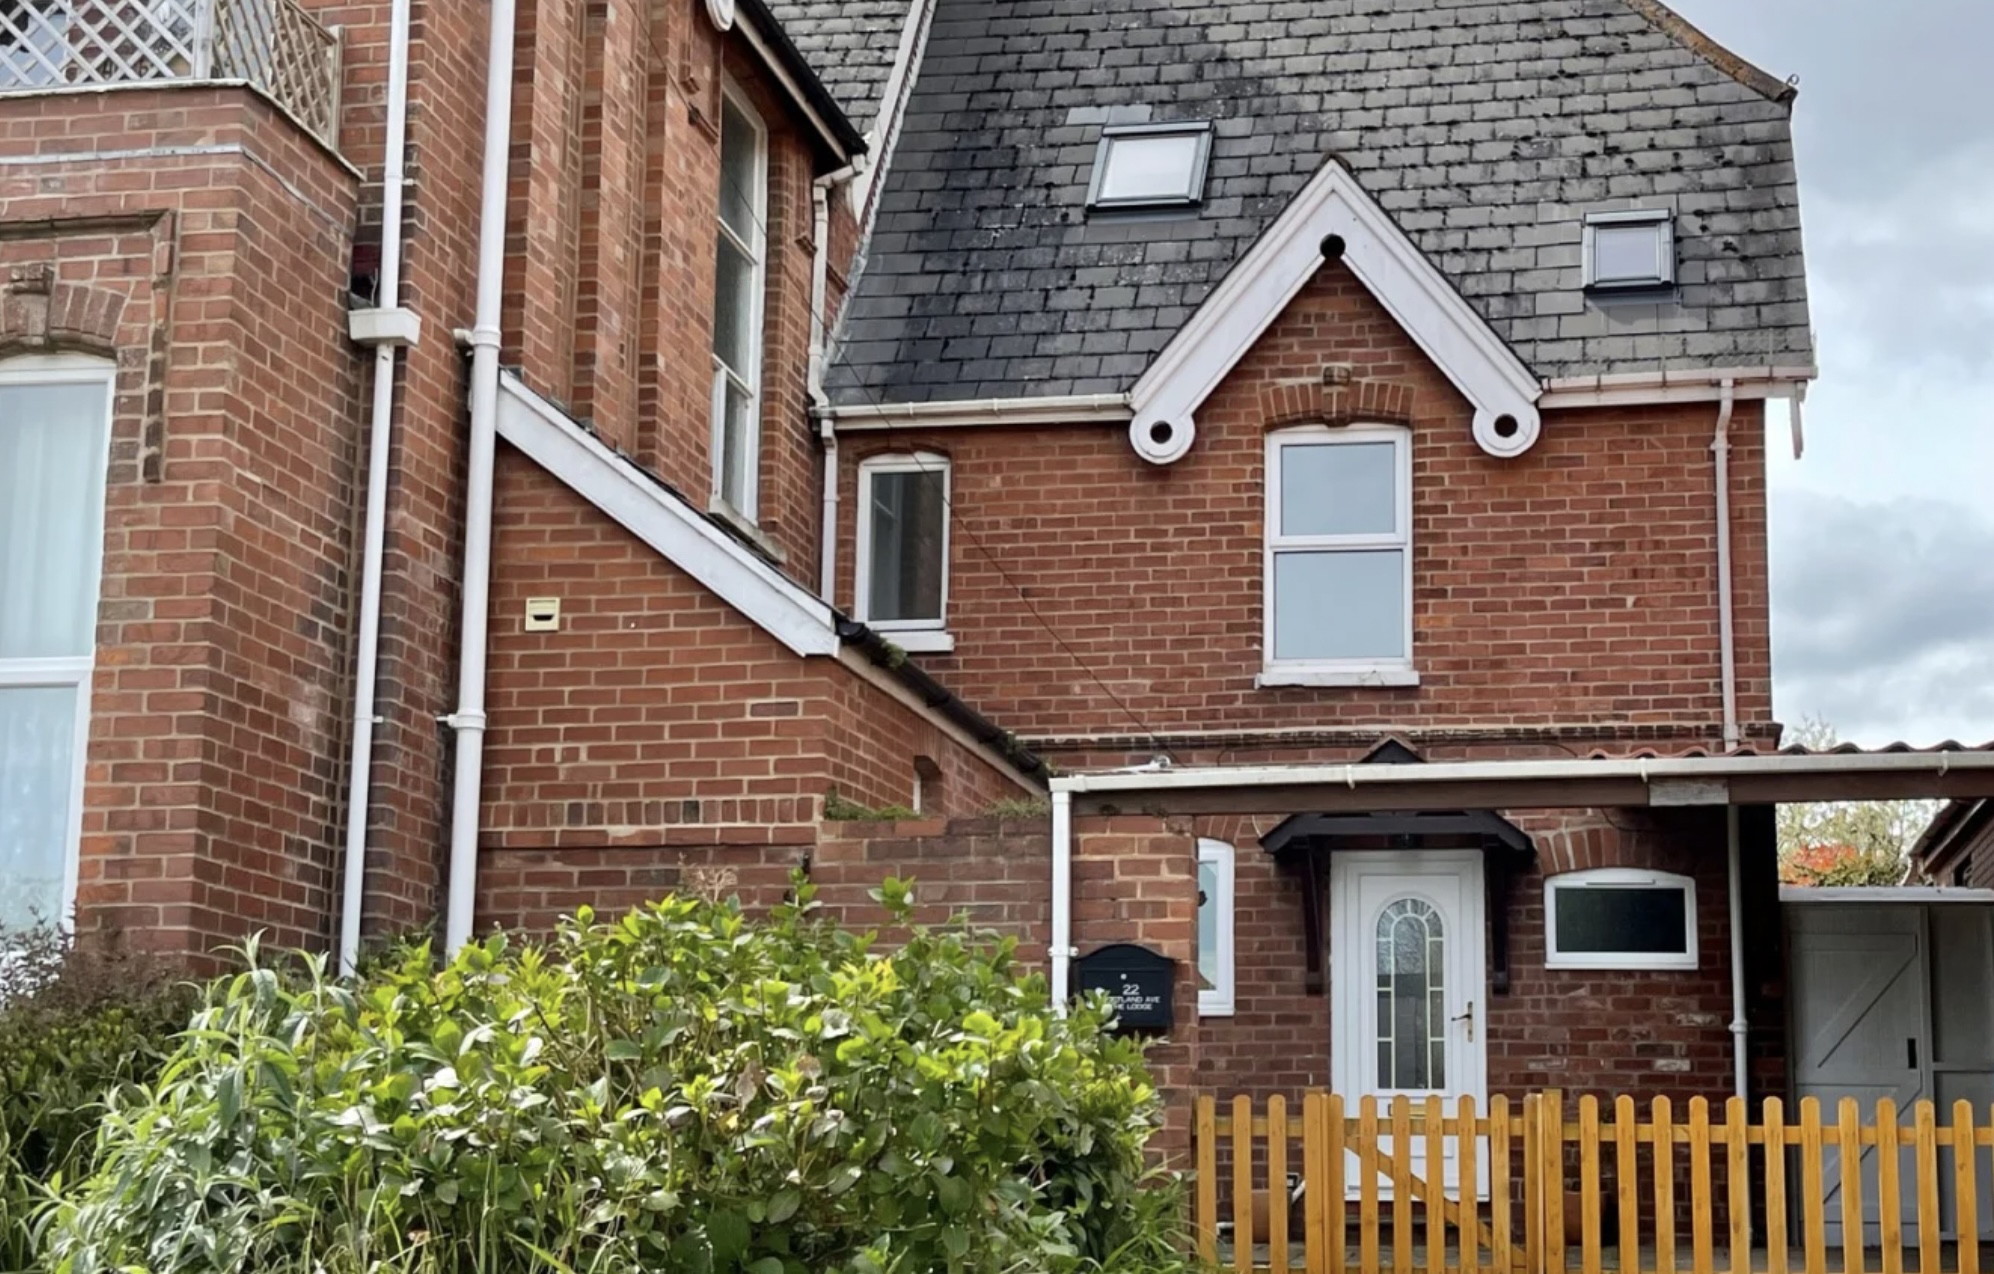 Exmouth's property of the week is a three-bed semi-detached house in Portland Avenue